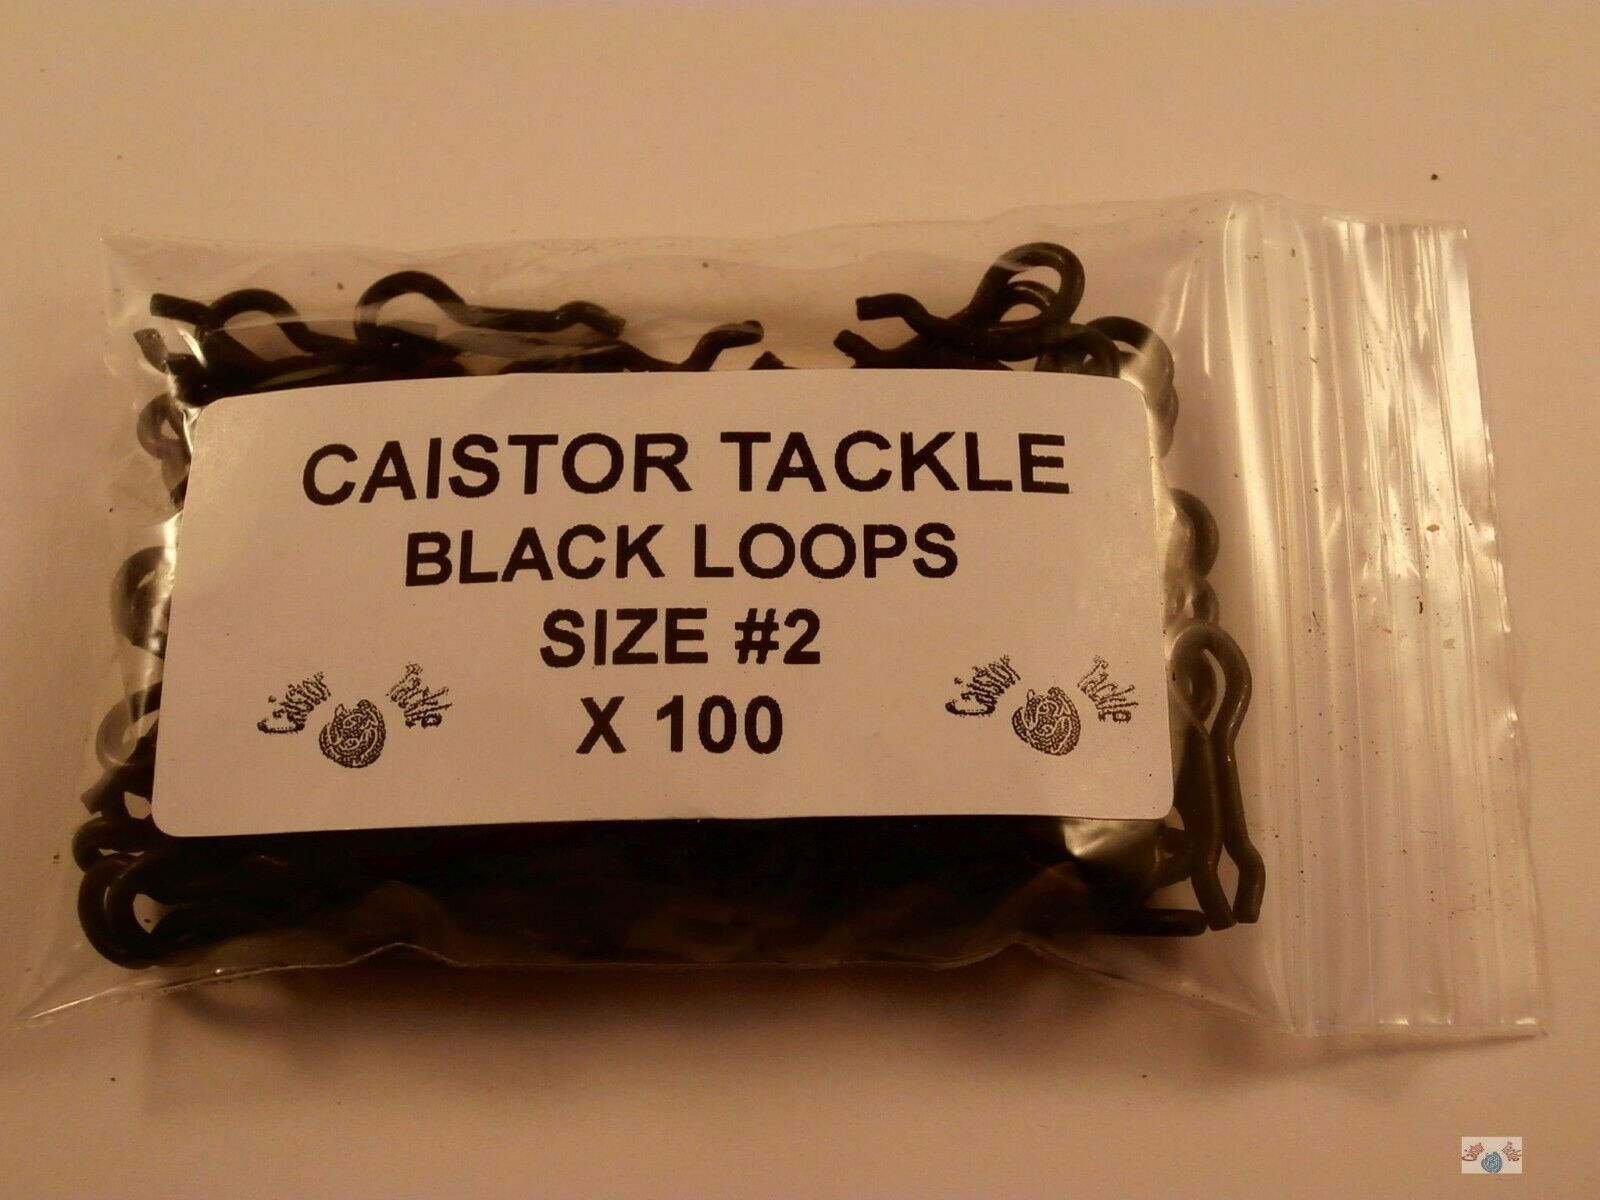 Do-it loops size 2 S Steel eye or Black loops for carp weights distance bombs 